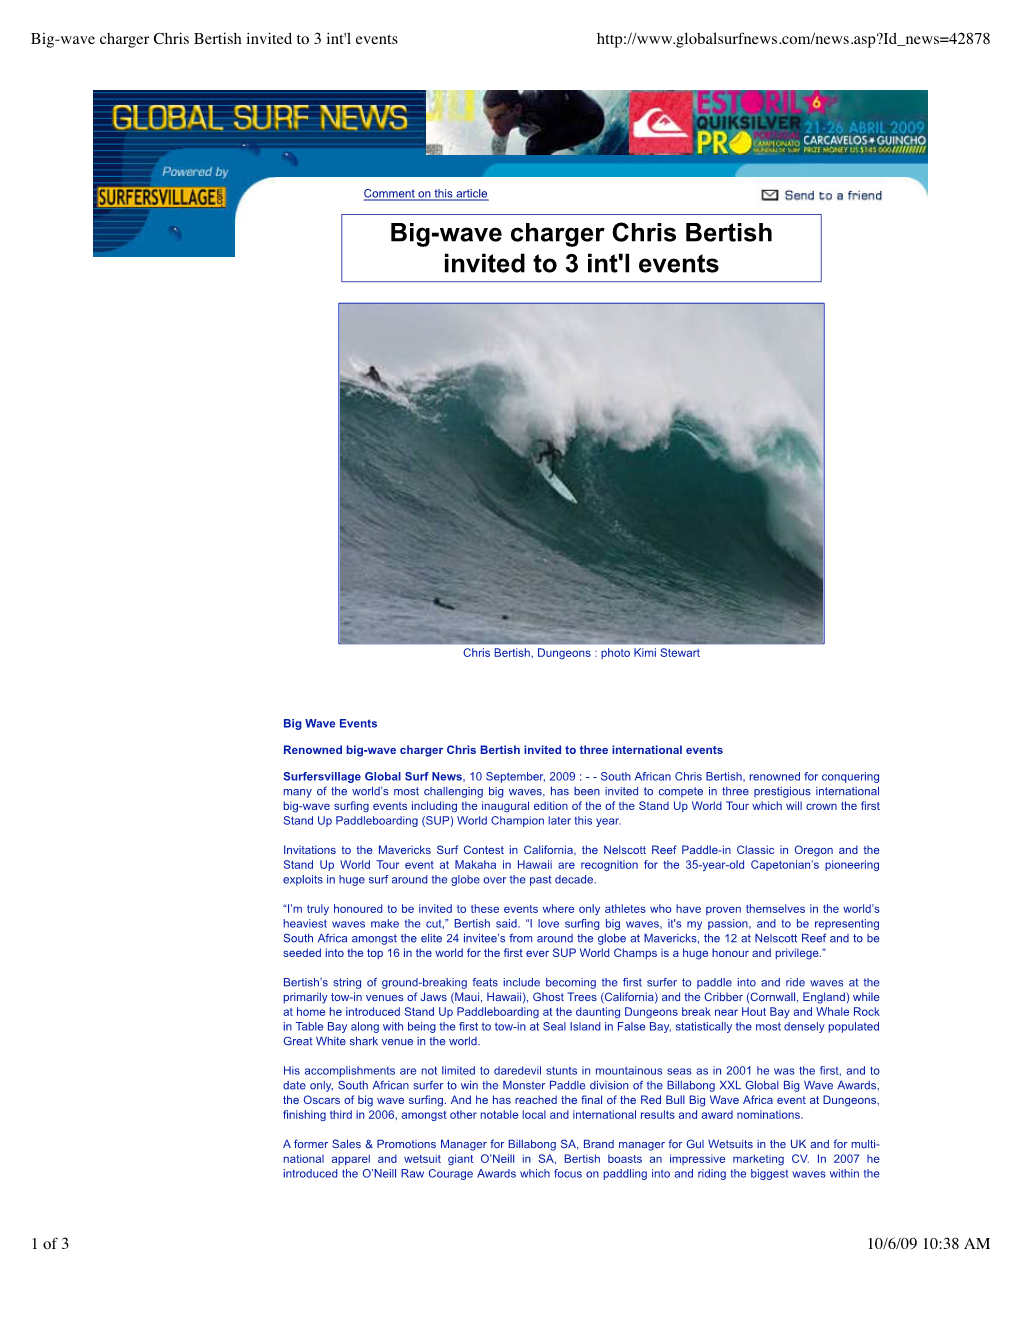 Big-Wave Charger Chris Bertish Invited to 3 Int'l Events